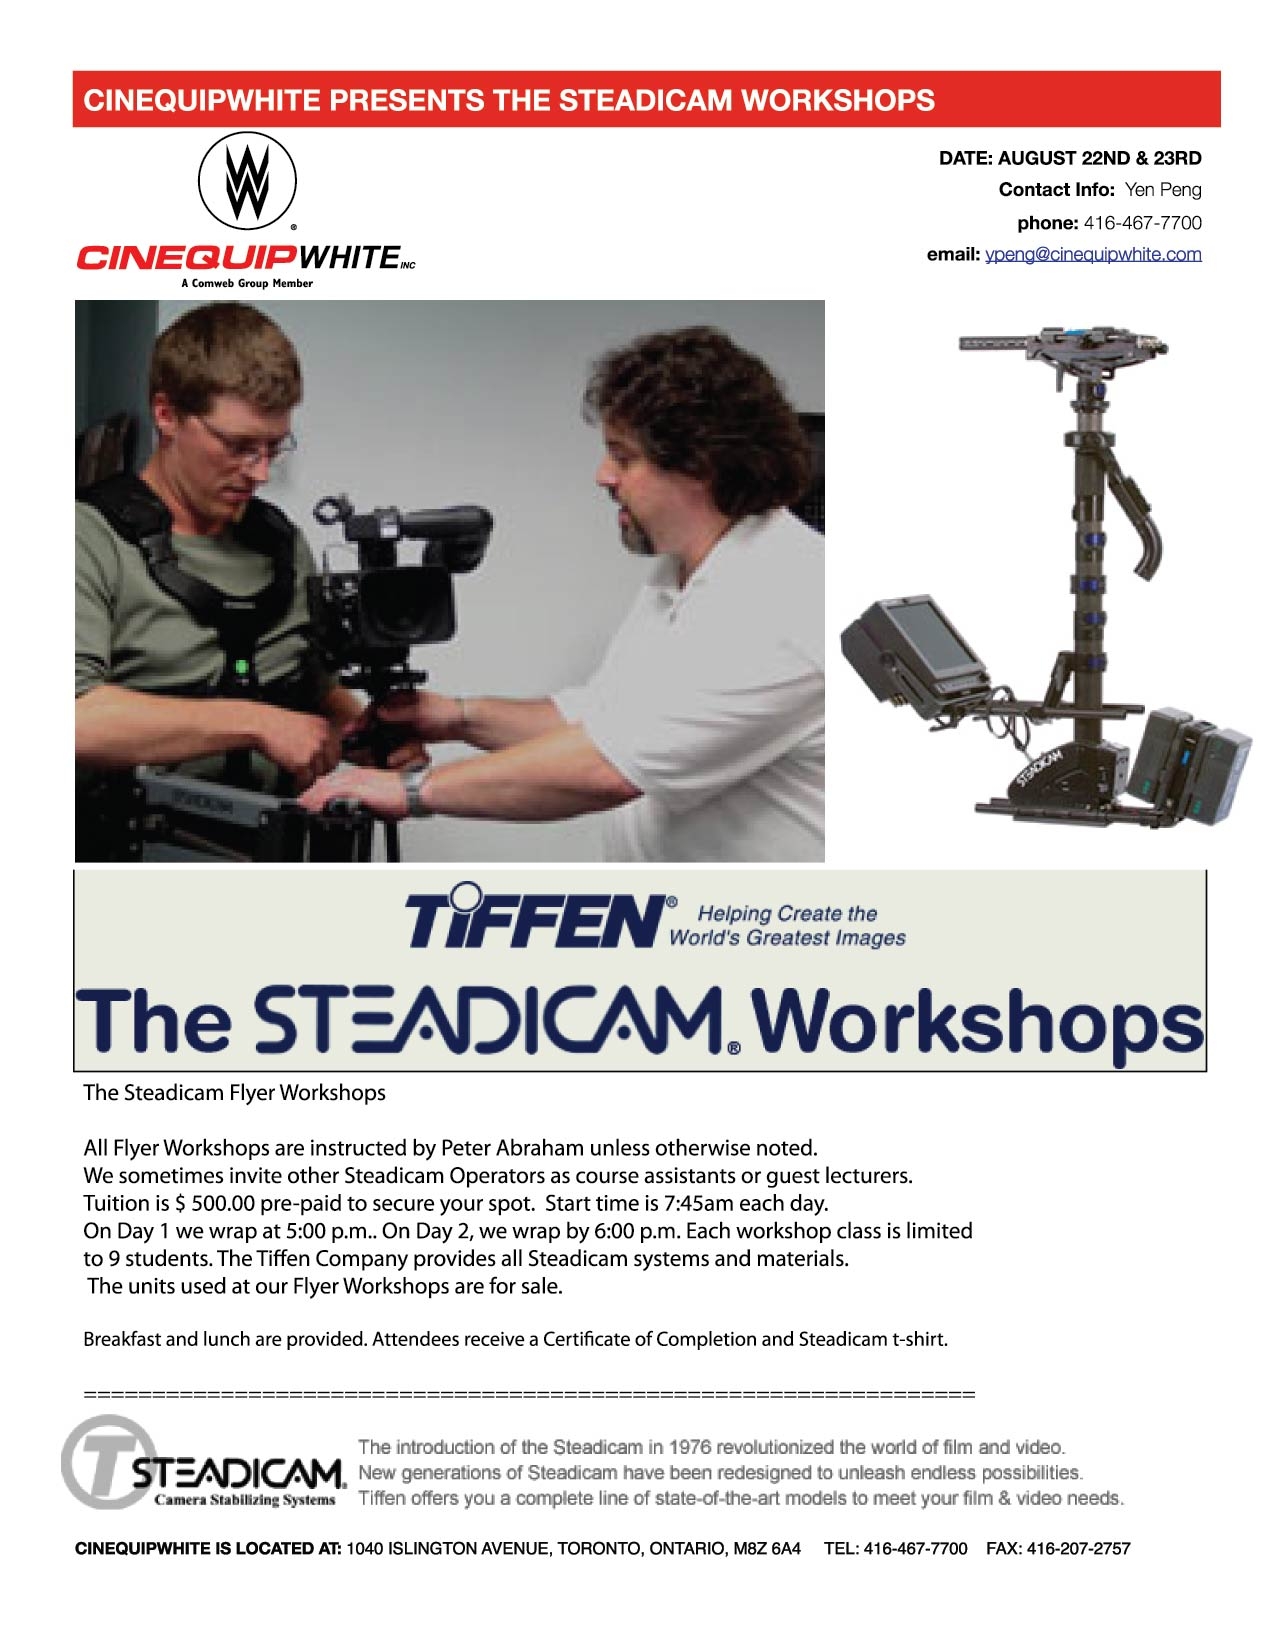 If you are interested in the Steadicam workshop coming up in August